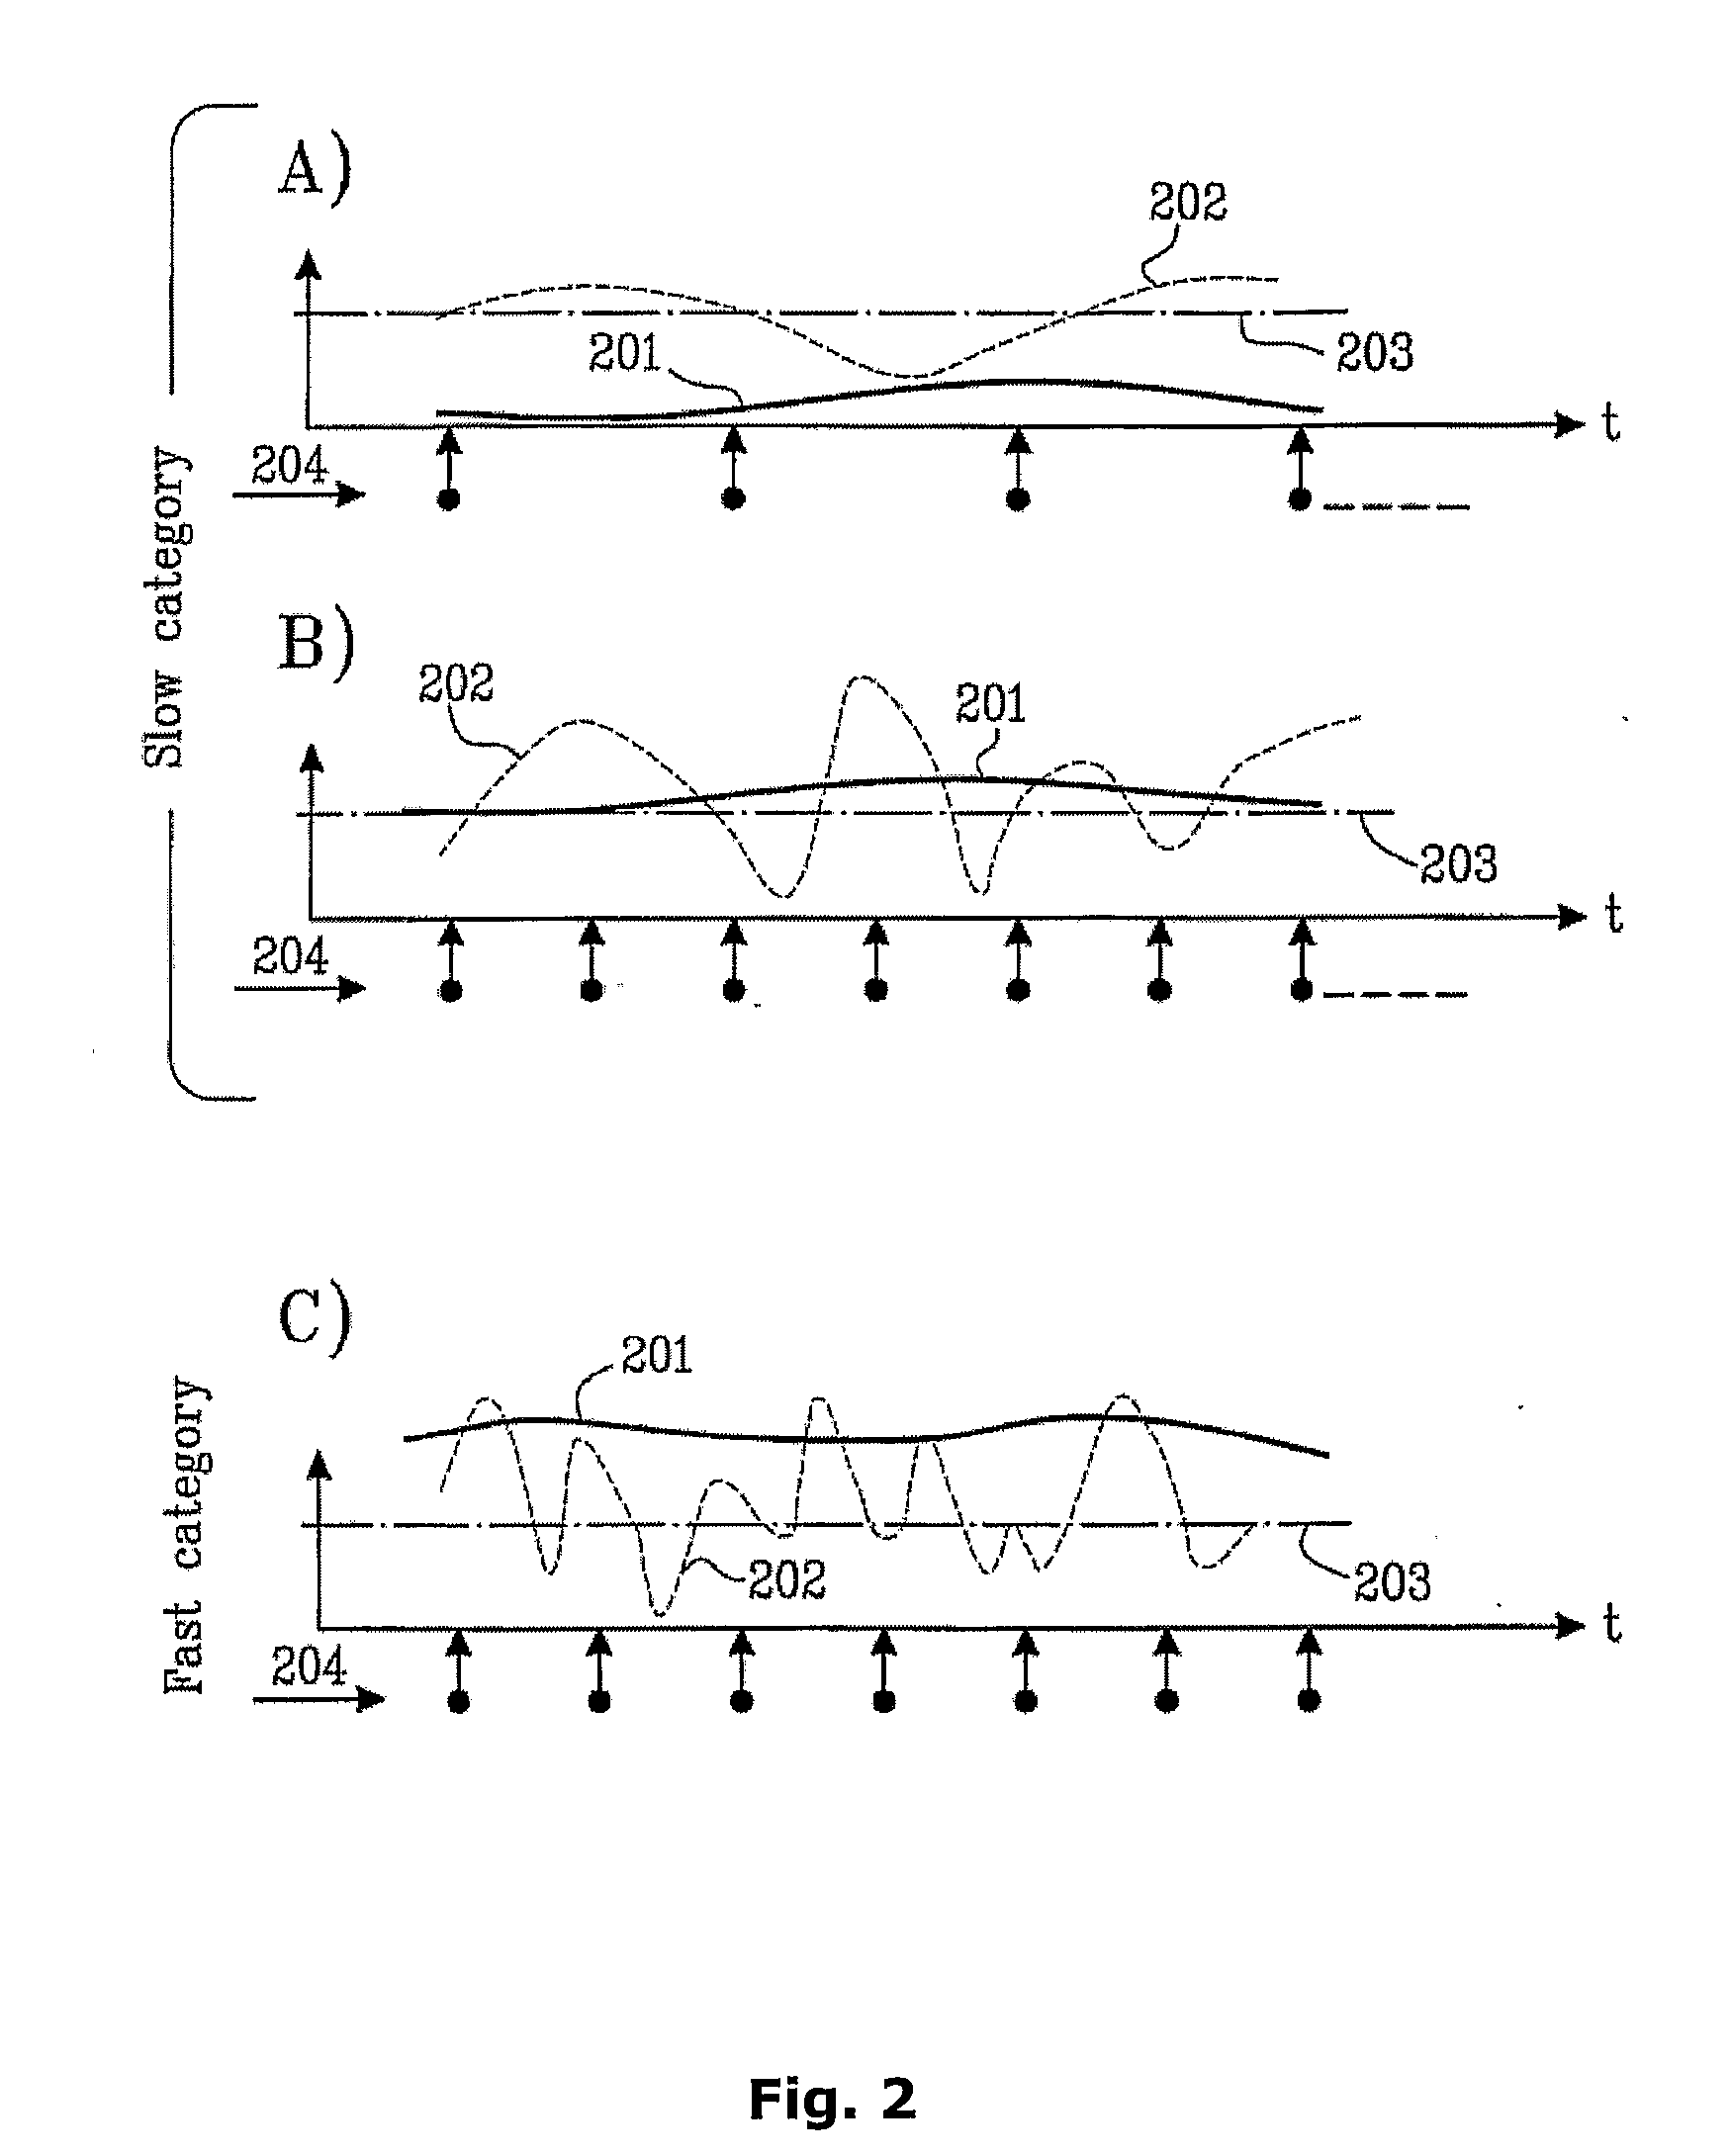 Method and System for Efficient Routing in Ad Hoc Networks